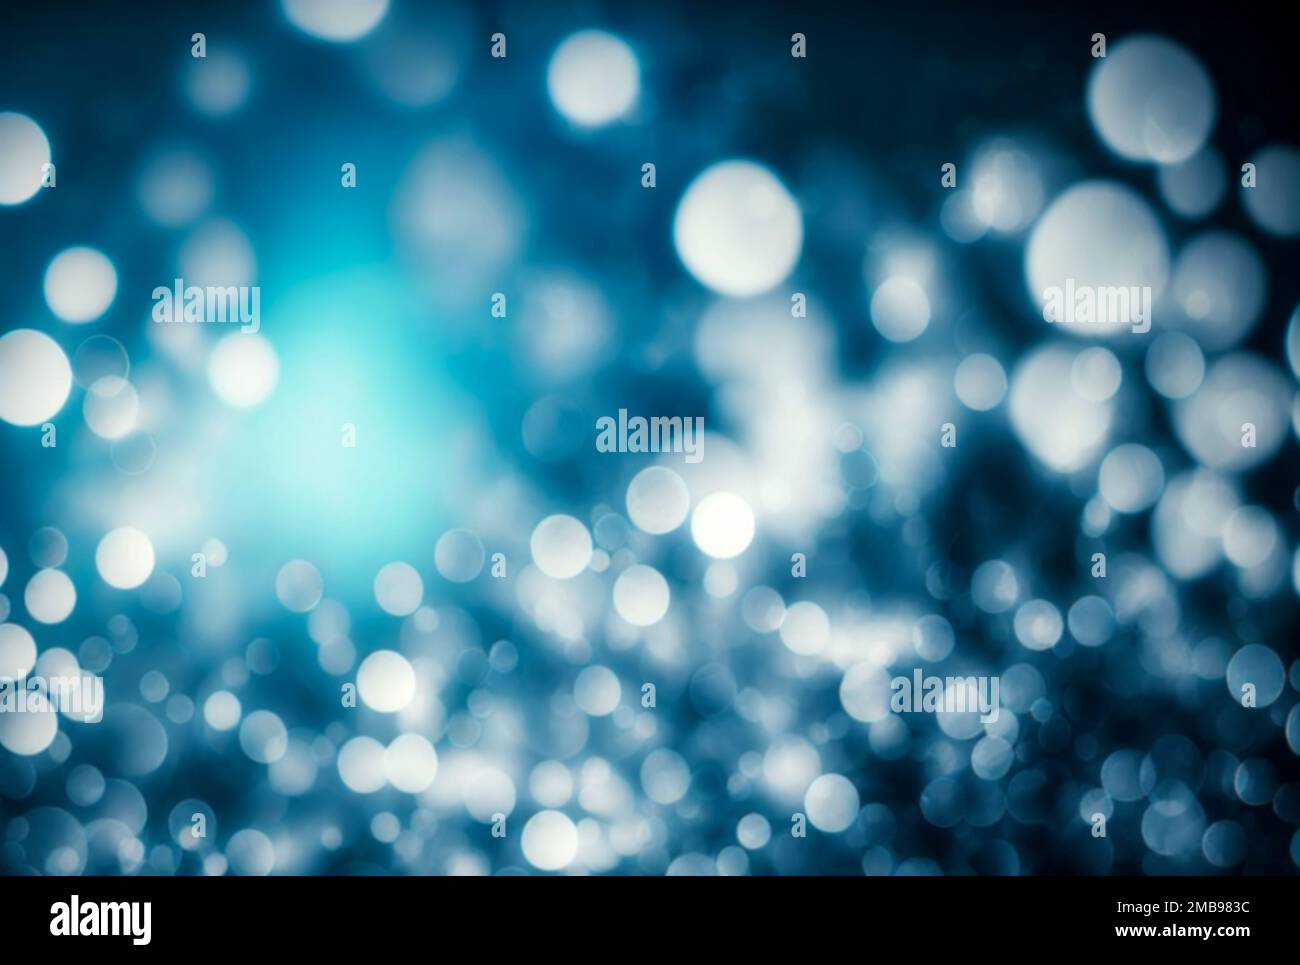 Abstract blue blurred bokeh background with various sized bright round shiny lights and dark spots Stock Photo